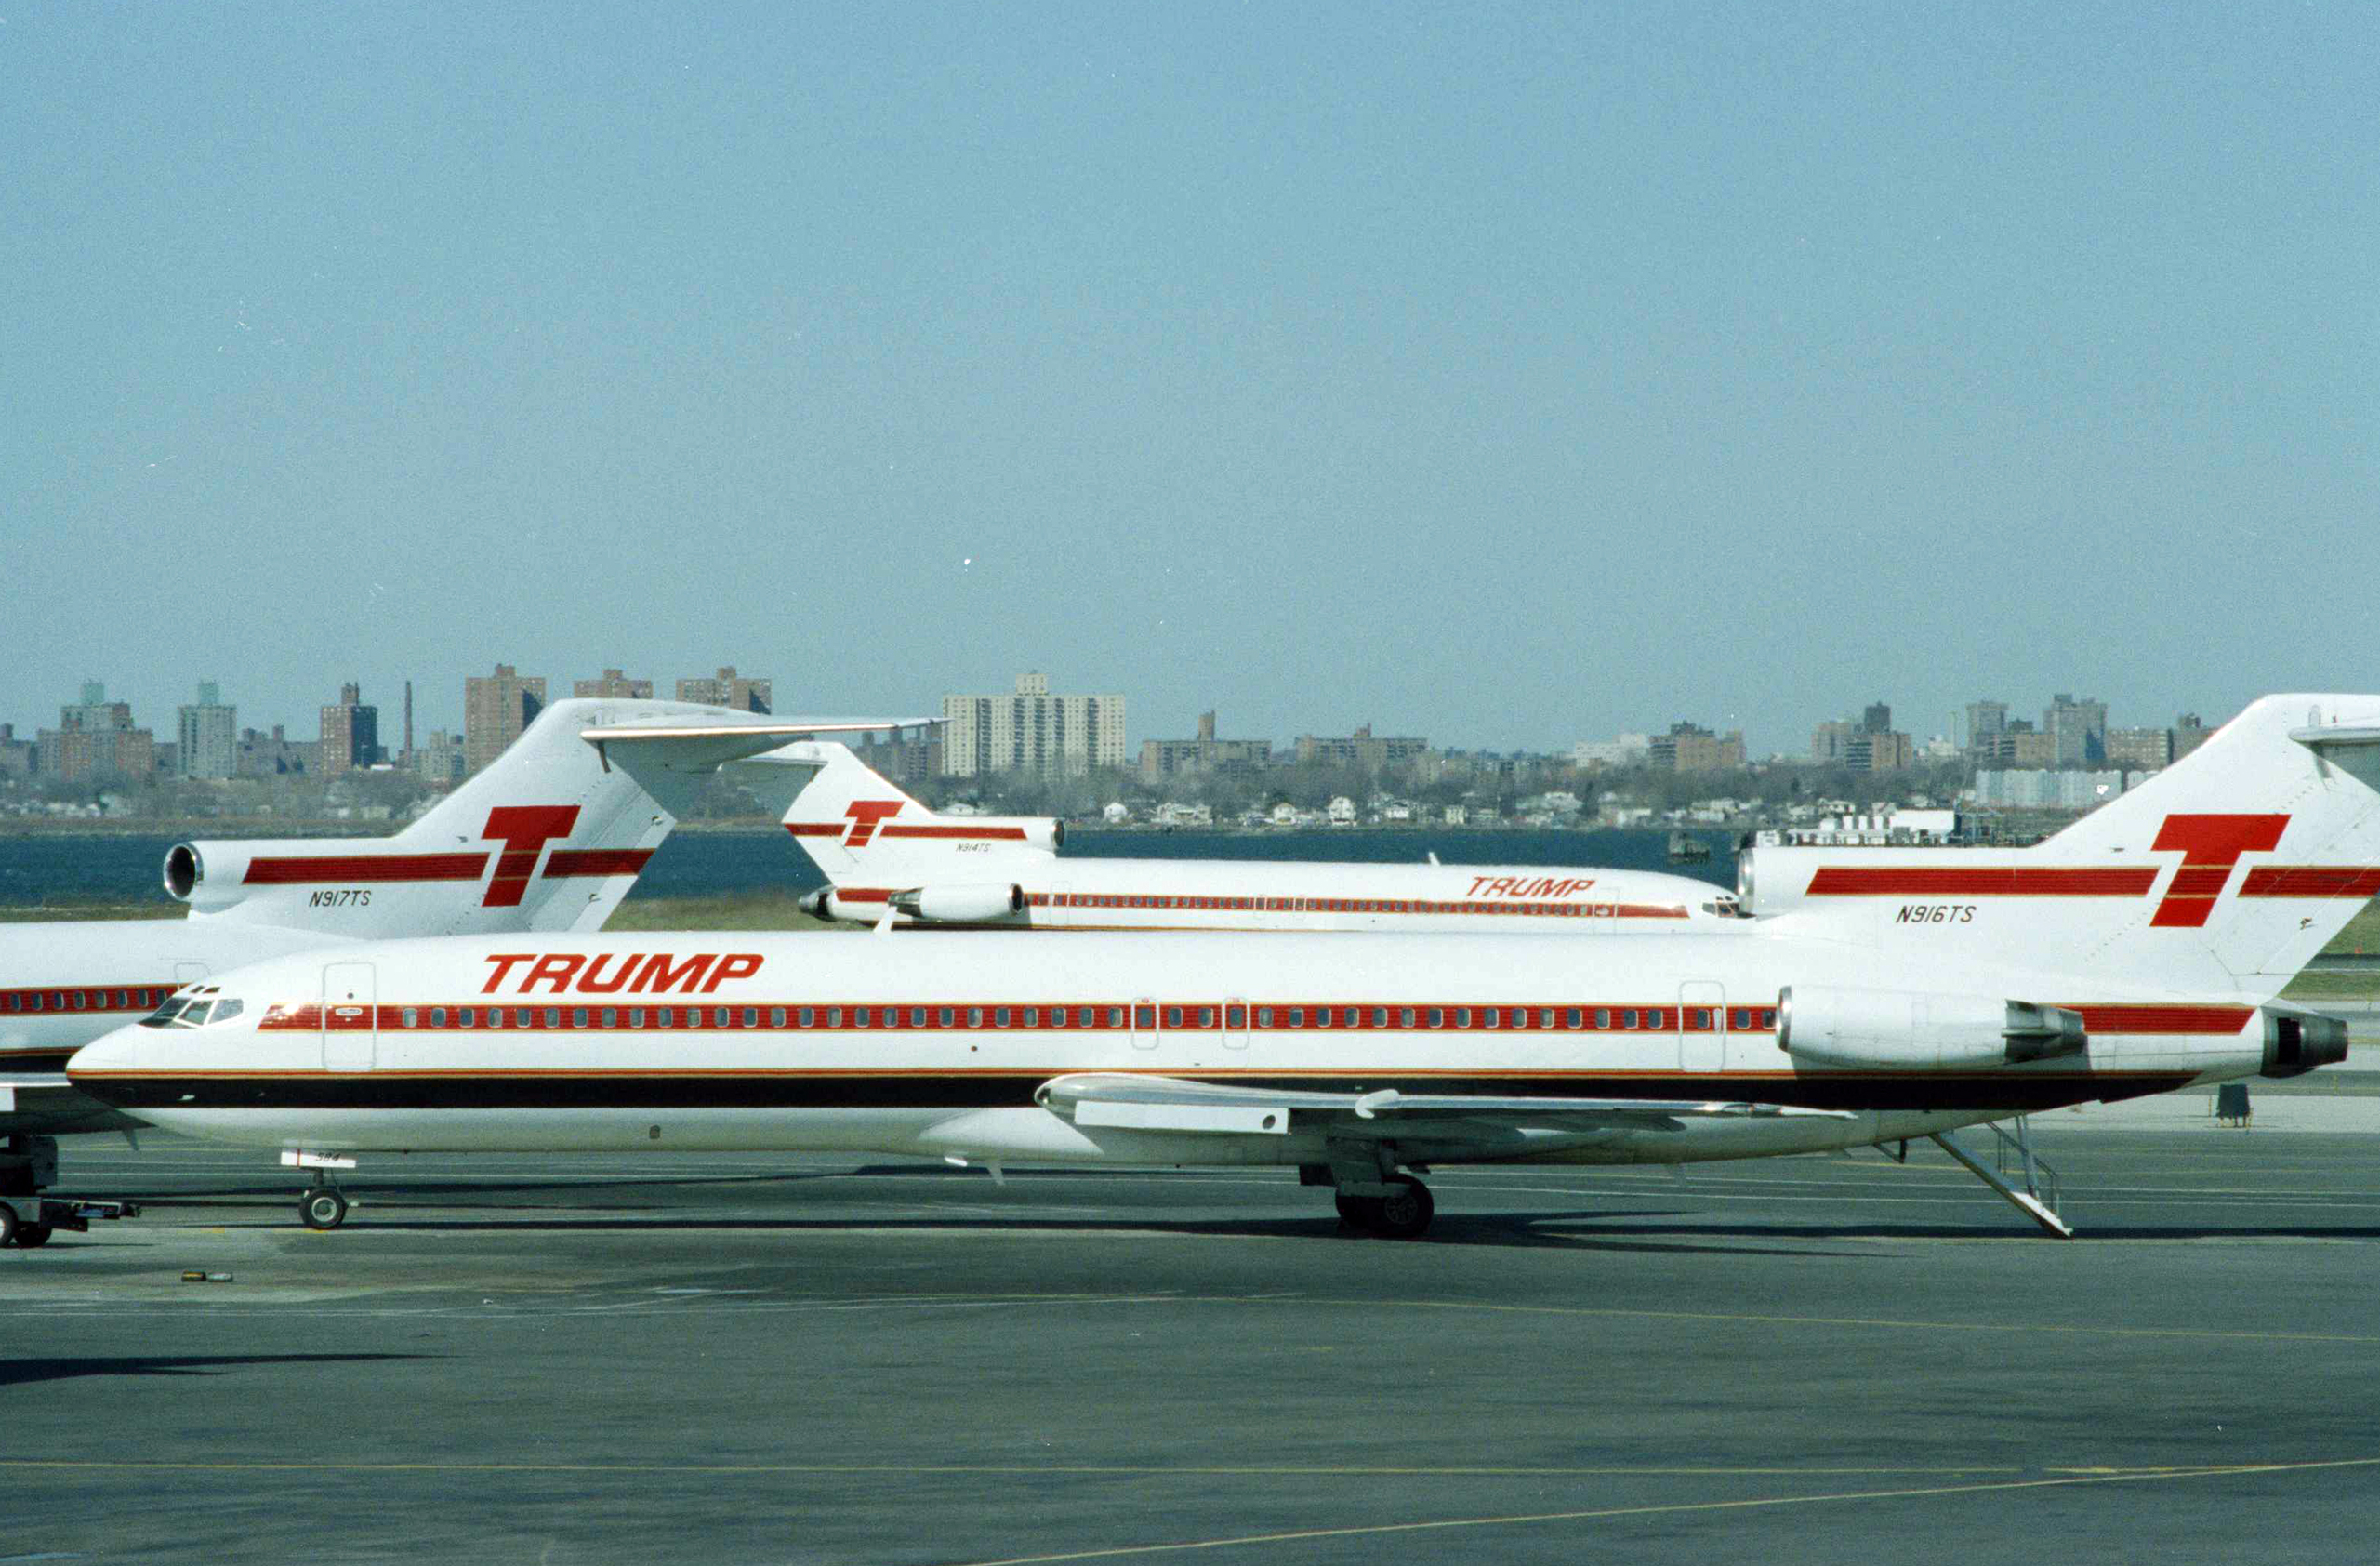 NWA Inc., parent company of Northwest Airlines, is negotiating to operate and eventually to own the Trump Shuttle at New York’s LaGuardia Airport on Friday, March 8, 1991, according to a published report on Friday. The move would cost developer Donald Trump a major asset, but would help him reduce his debt, the Wall Street Journal said. (AP Photo/David A. Cantor)